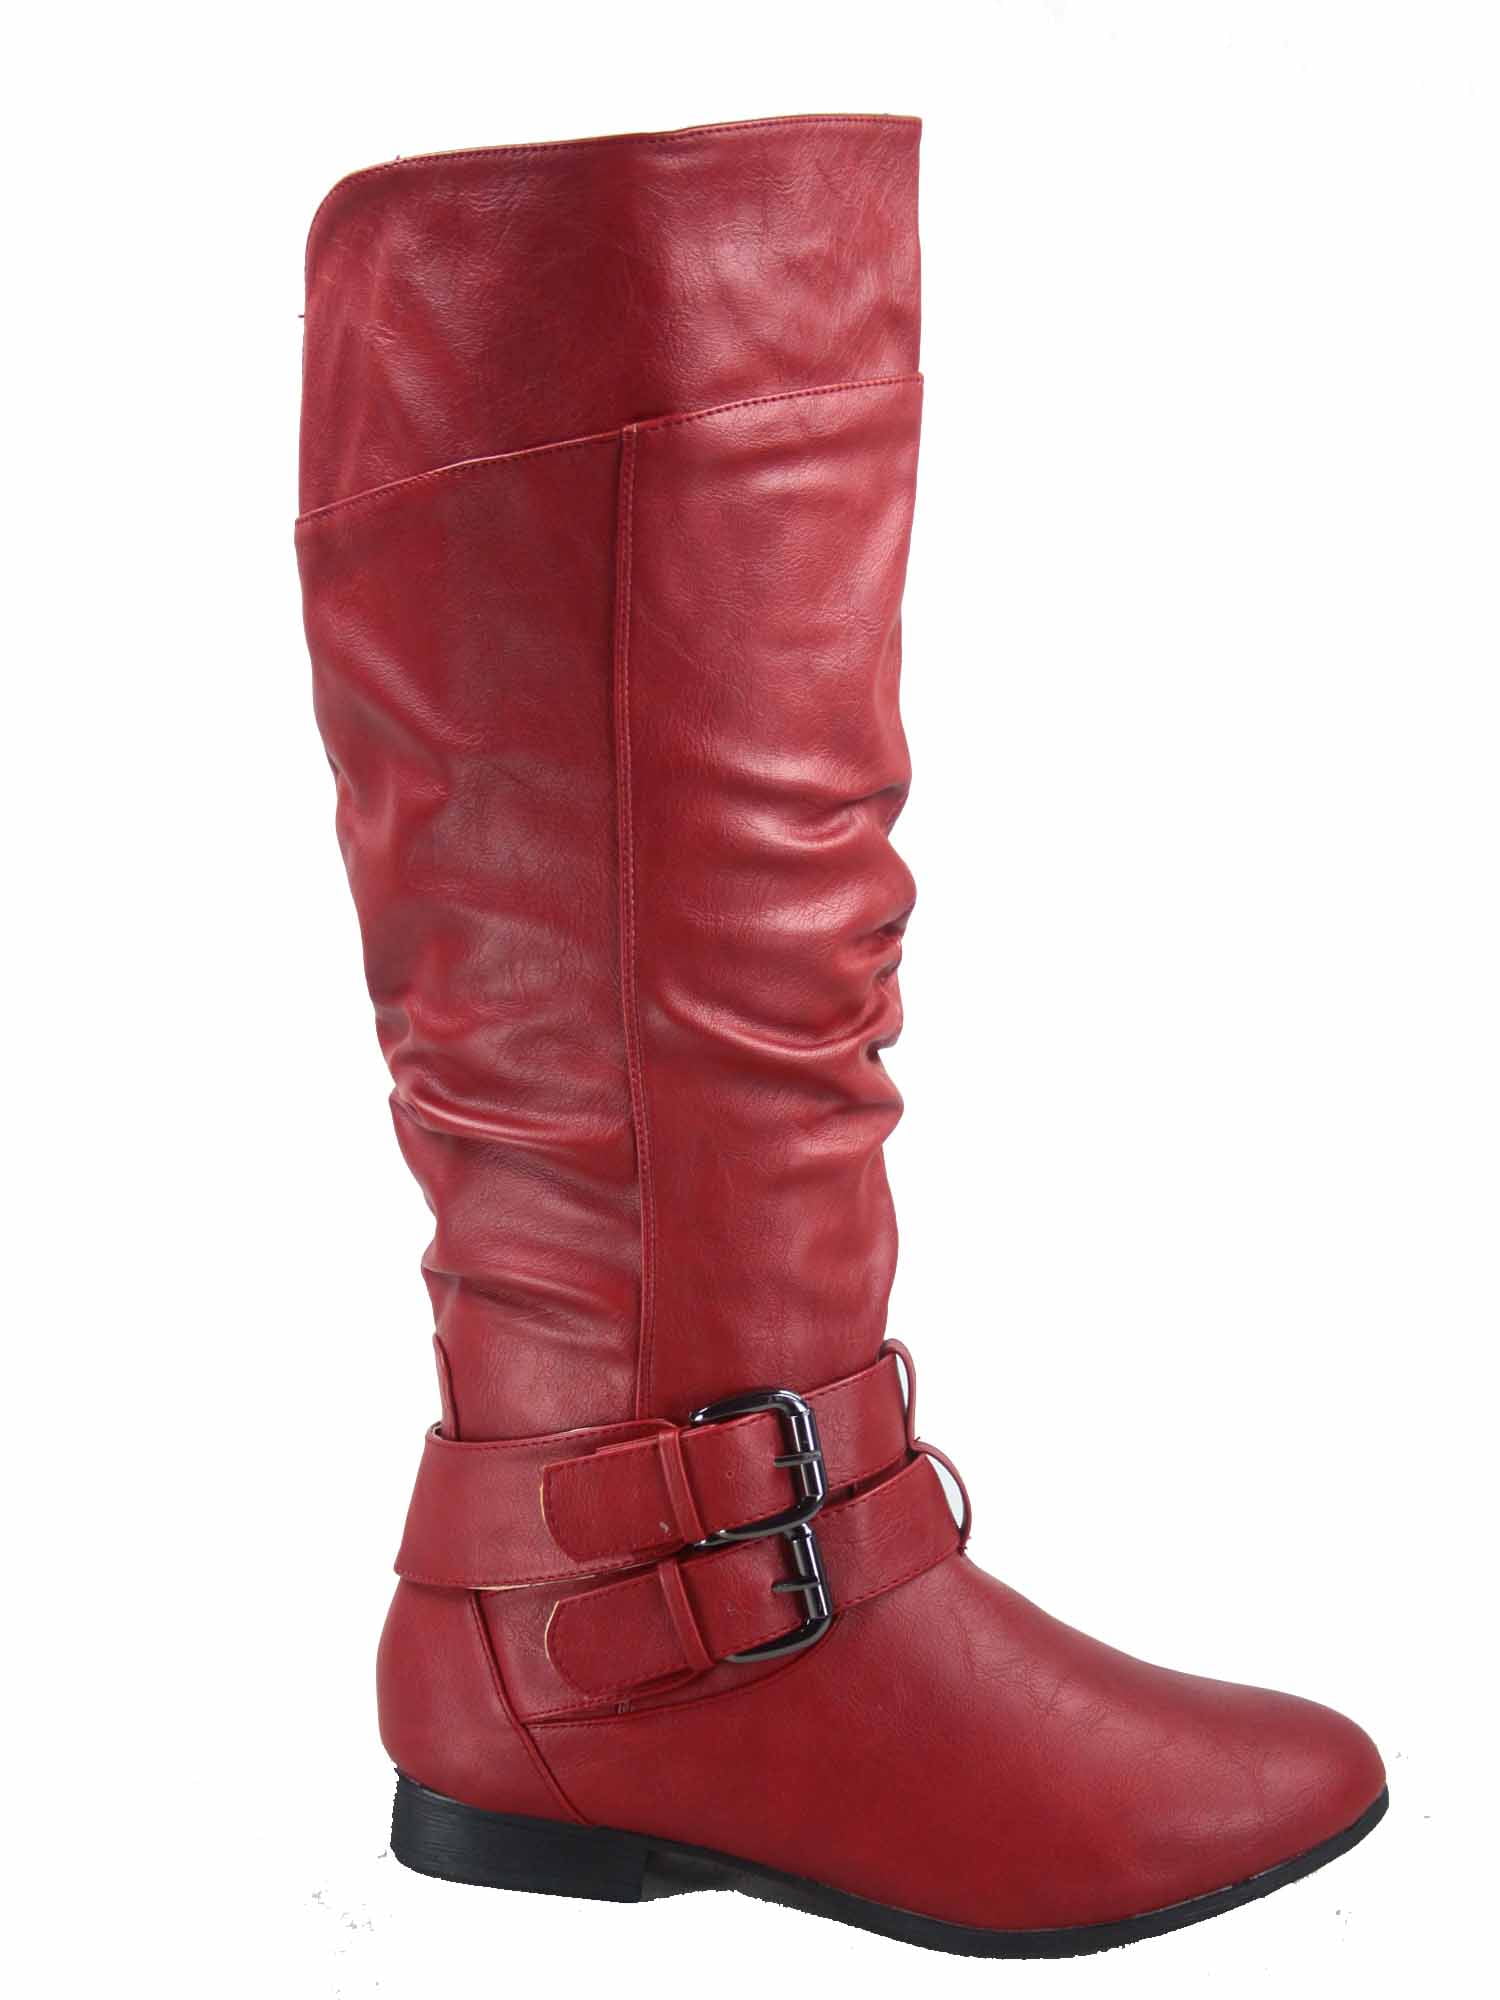 Round Toe Low Heel Motorcycle Riding Boots with Side Zipper Strappy Lace-Up Knee High Stacked Heel Boot Women's Buckle Combat Platform Boots 